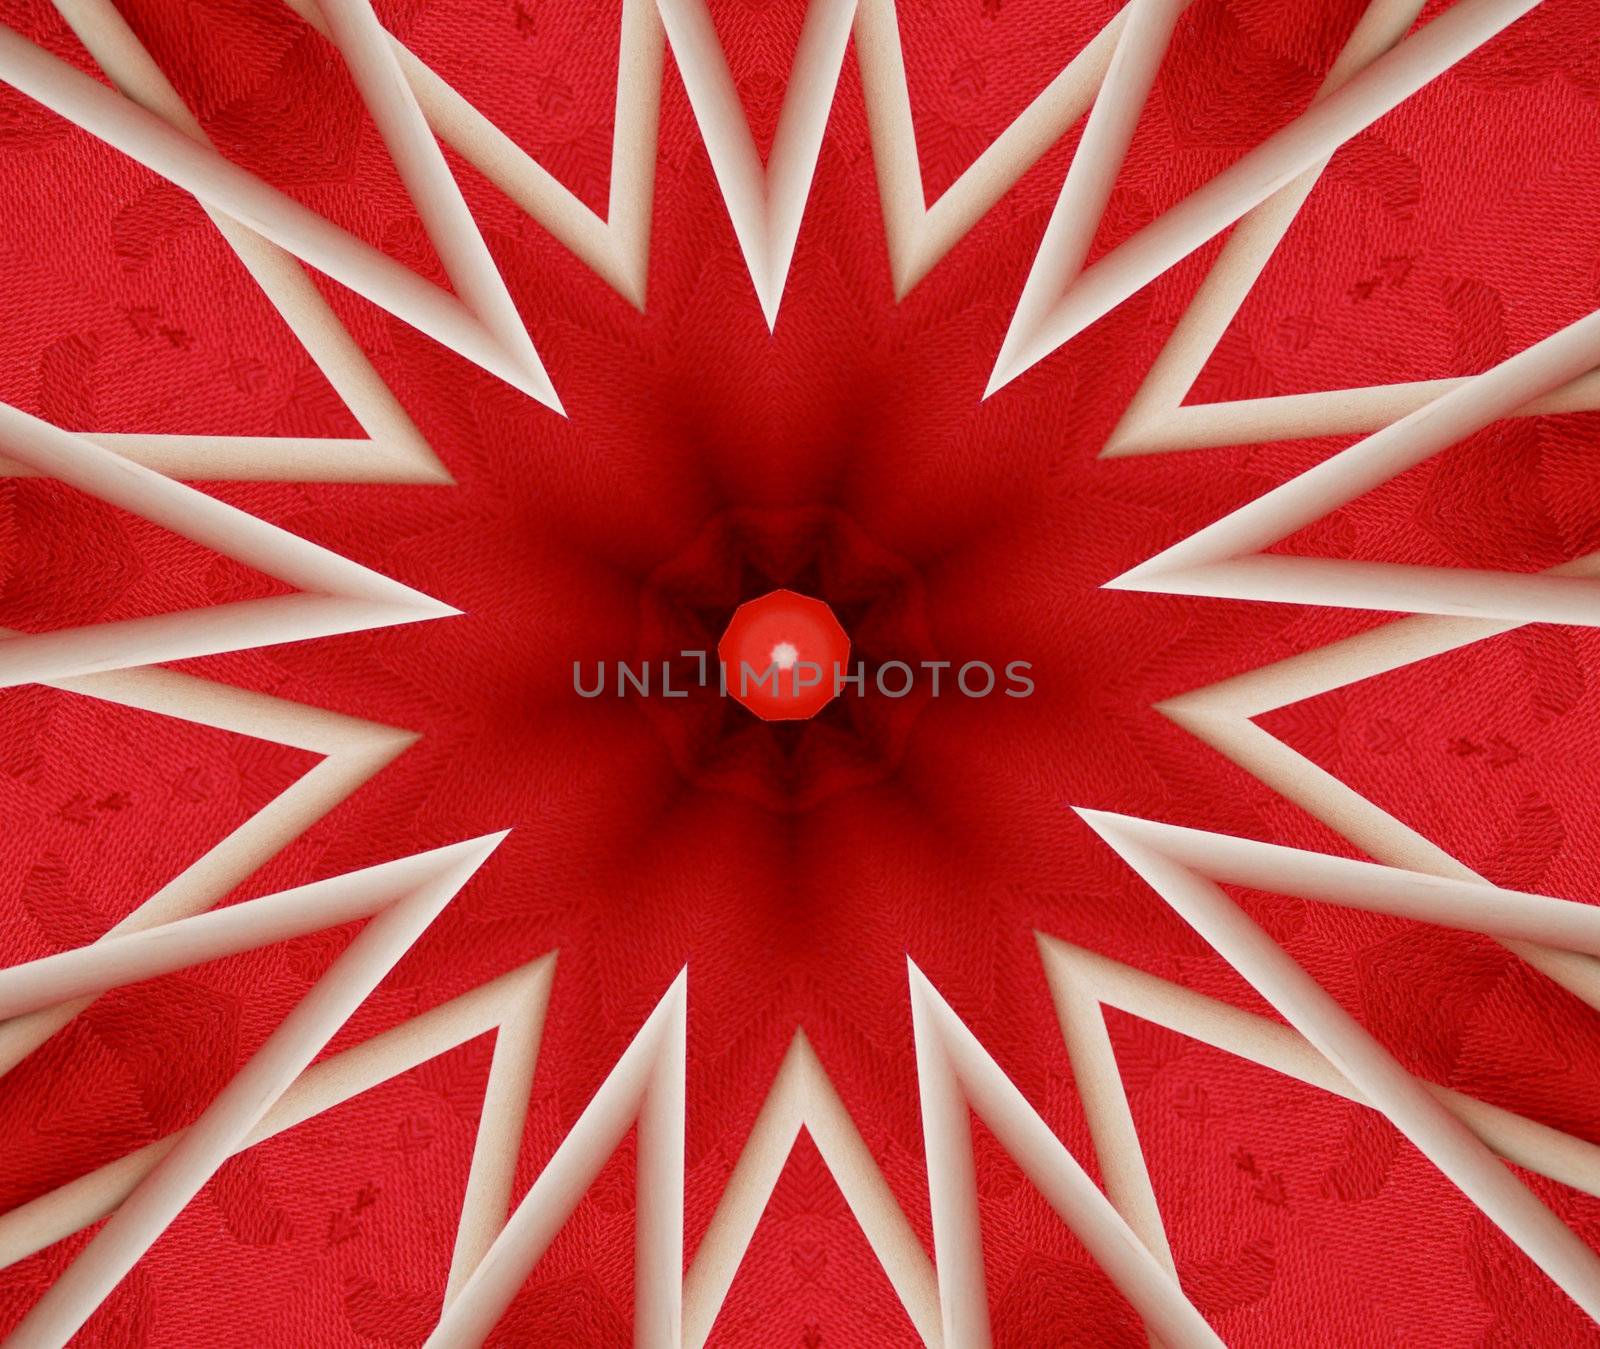 abstract star illustration in red and white